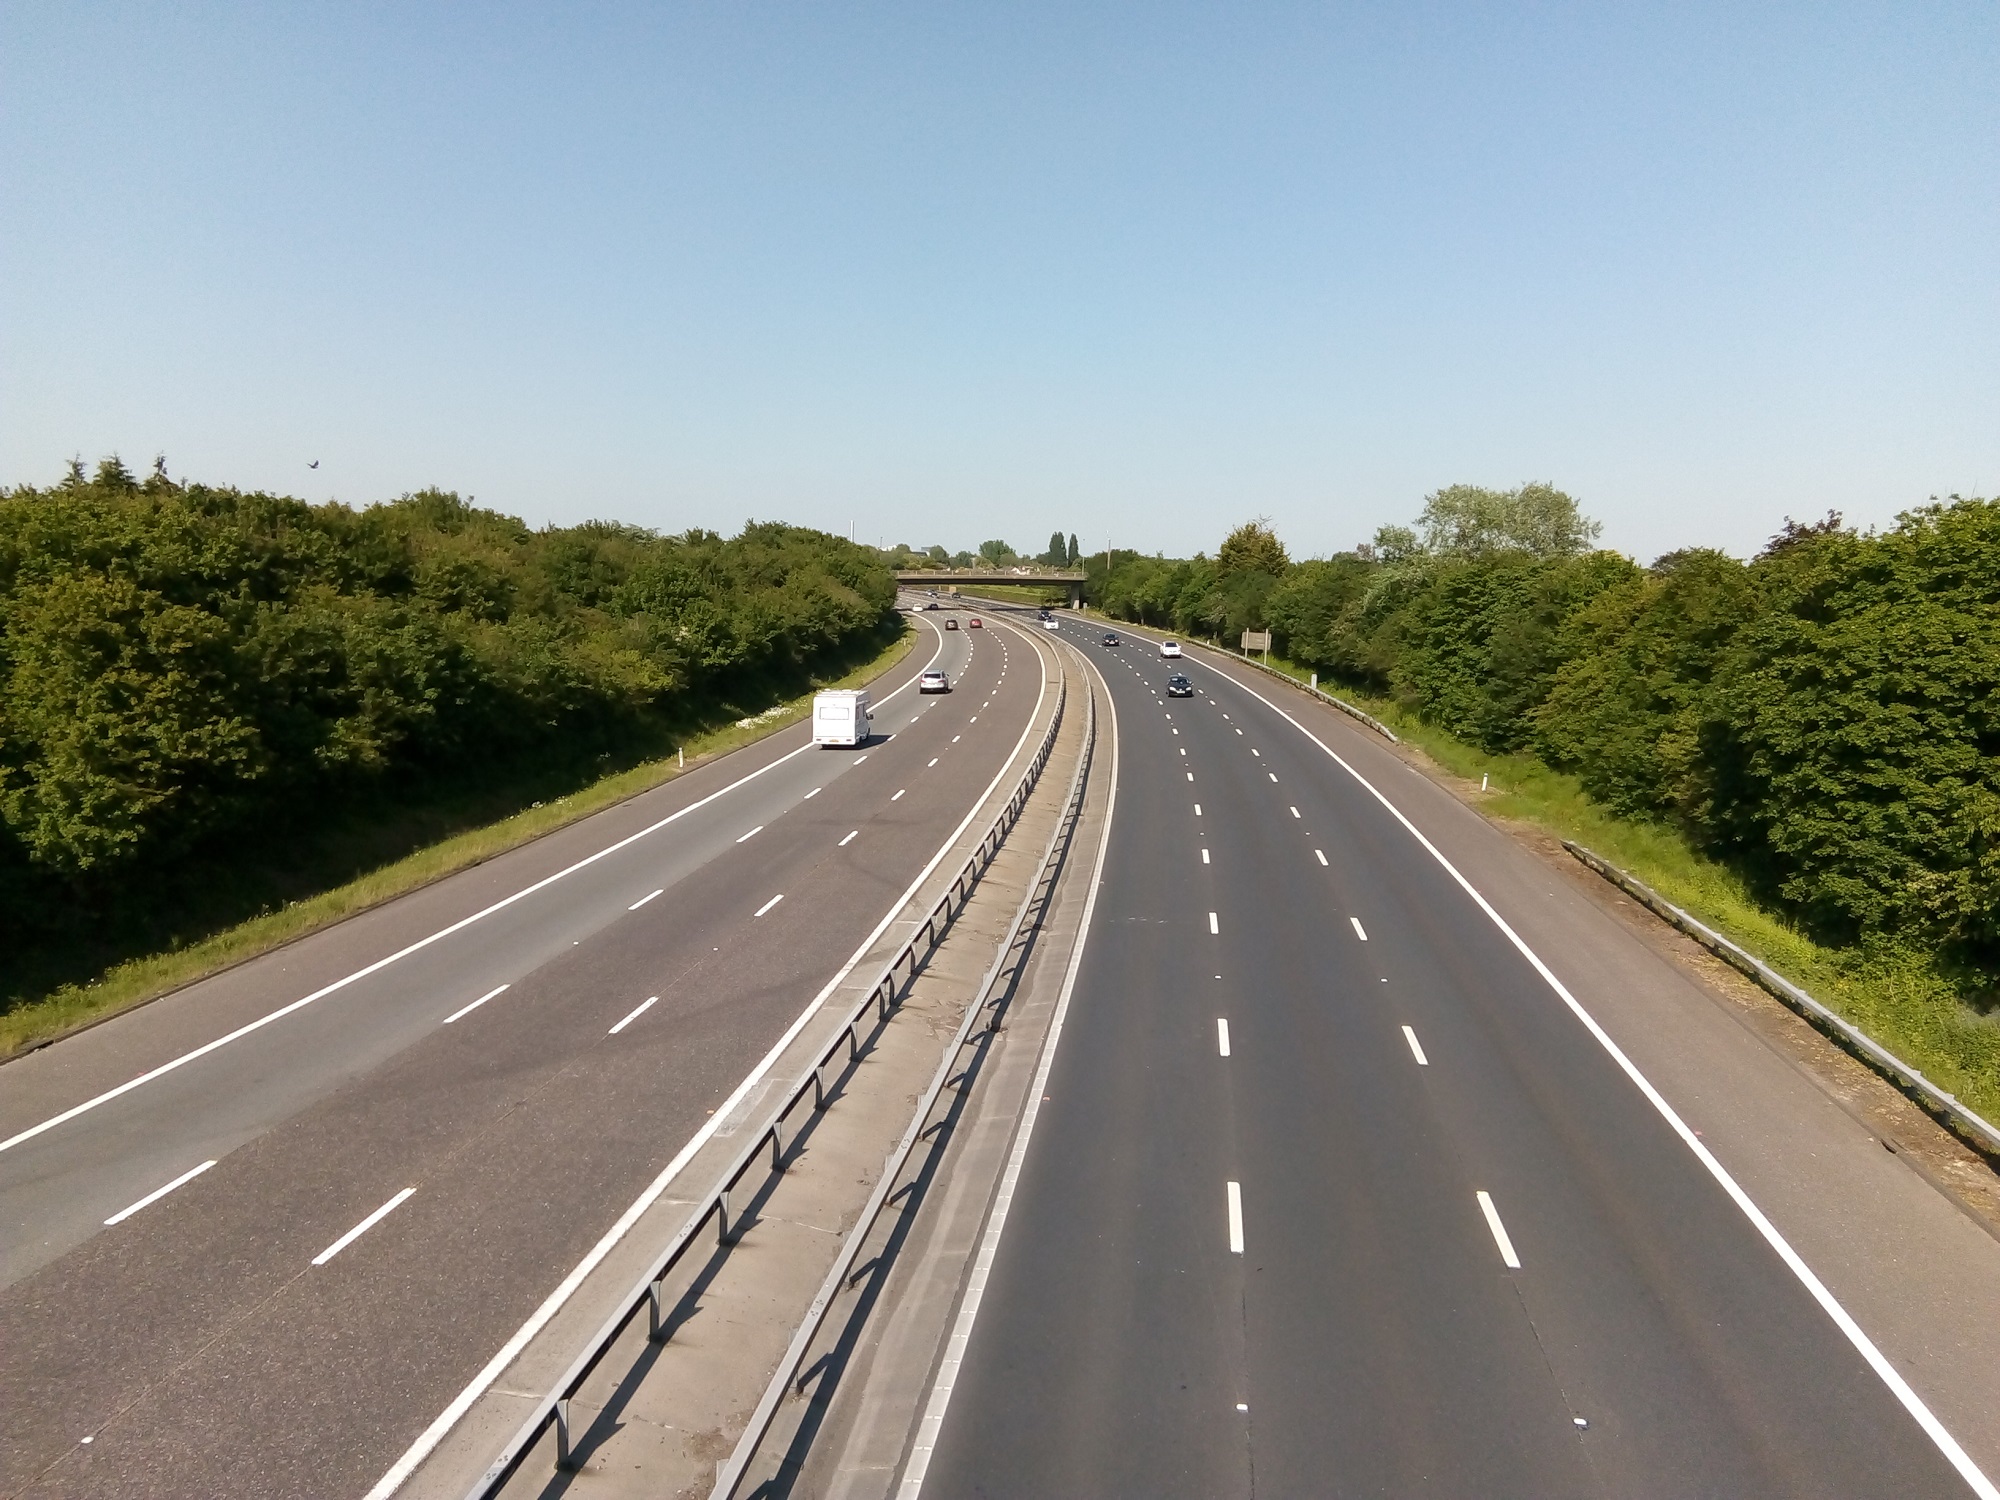 A quiet motorway viewed on a hot sunny afternoon. A bridge is visible in the distance, each side of the motorway is tree lined.